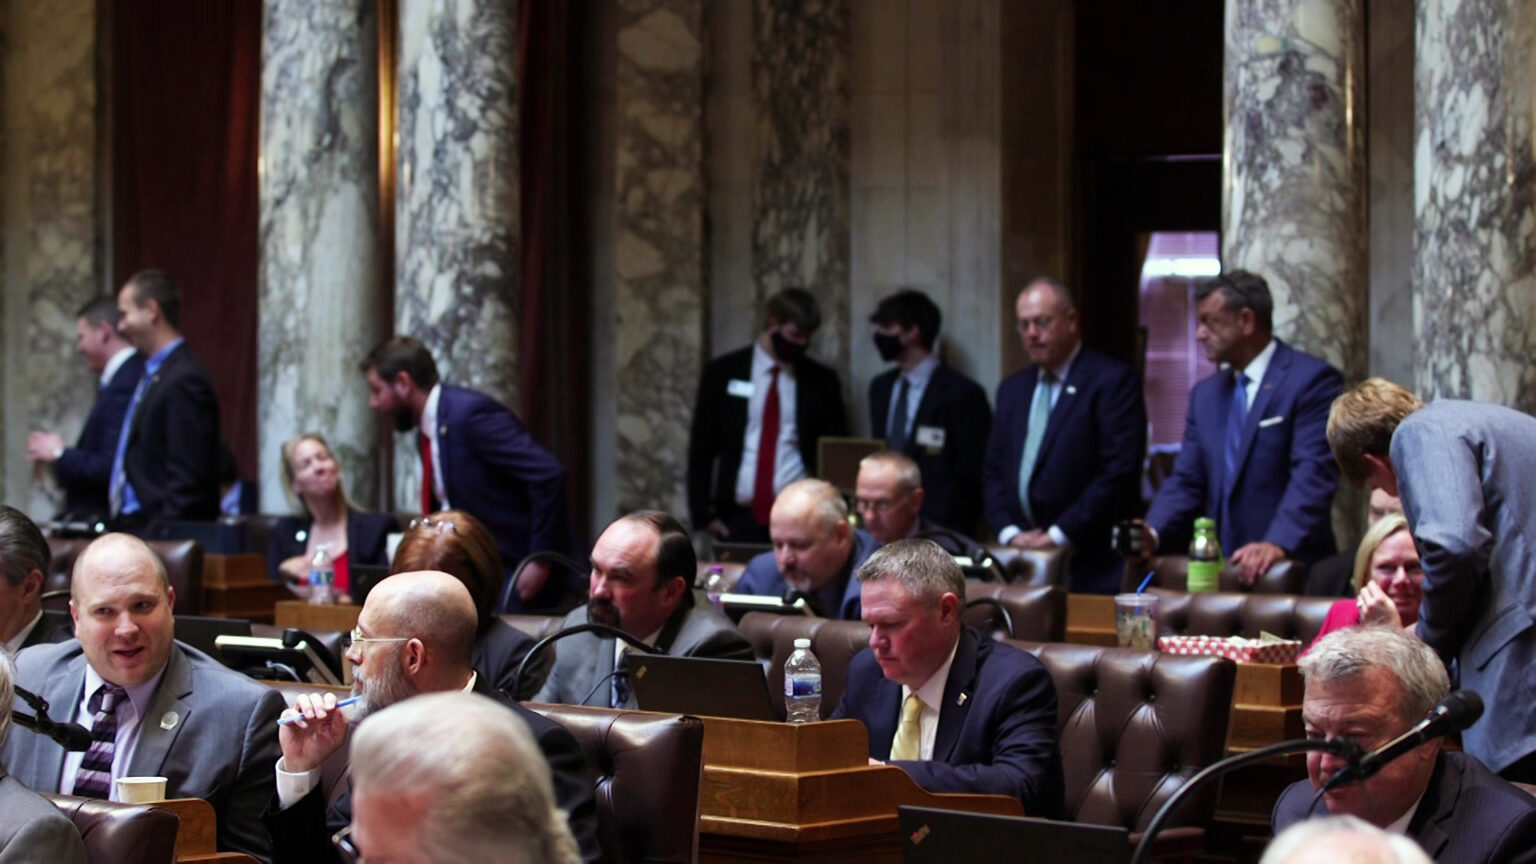 Wisconsin Assembly members and support staff dressed in professional attire sit at desks with large leather-padded chairs or stand in aisles in a room with marble walls and columns.